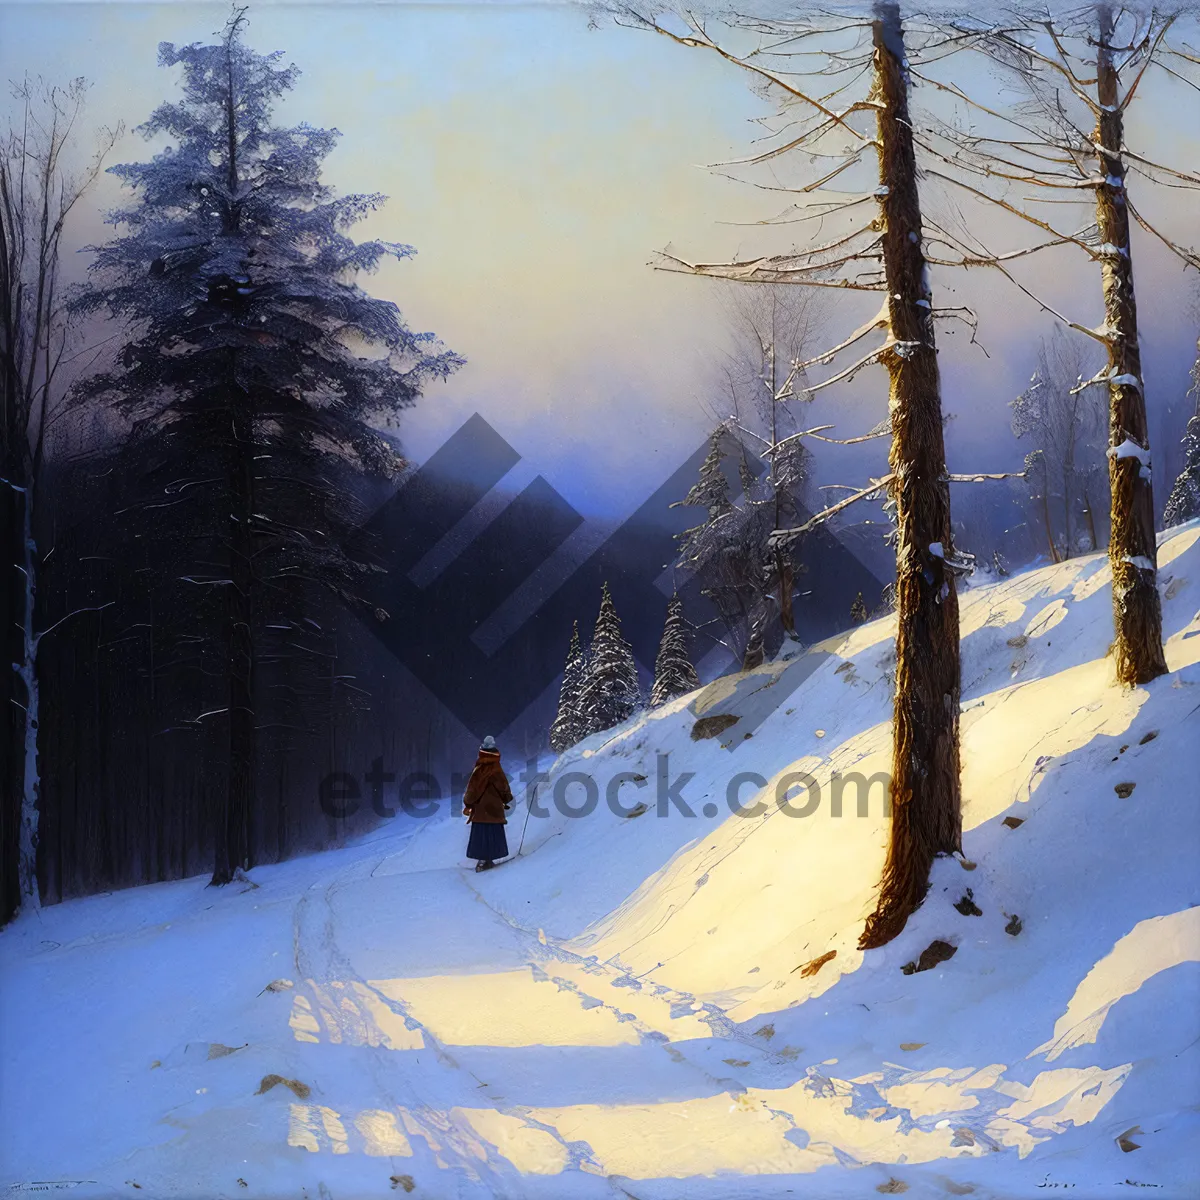 Picture of Wintry Forest Landscape with Snowy Mountains